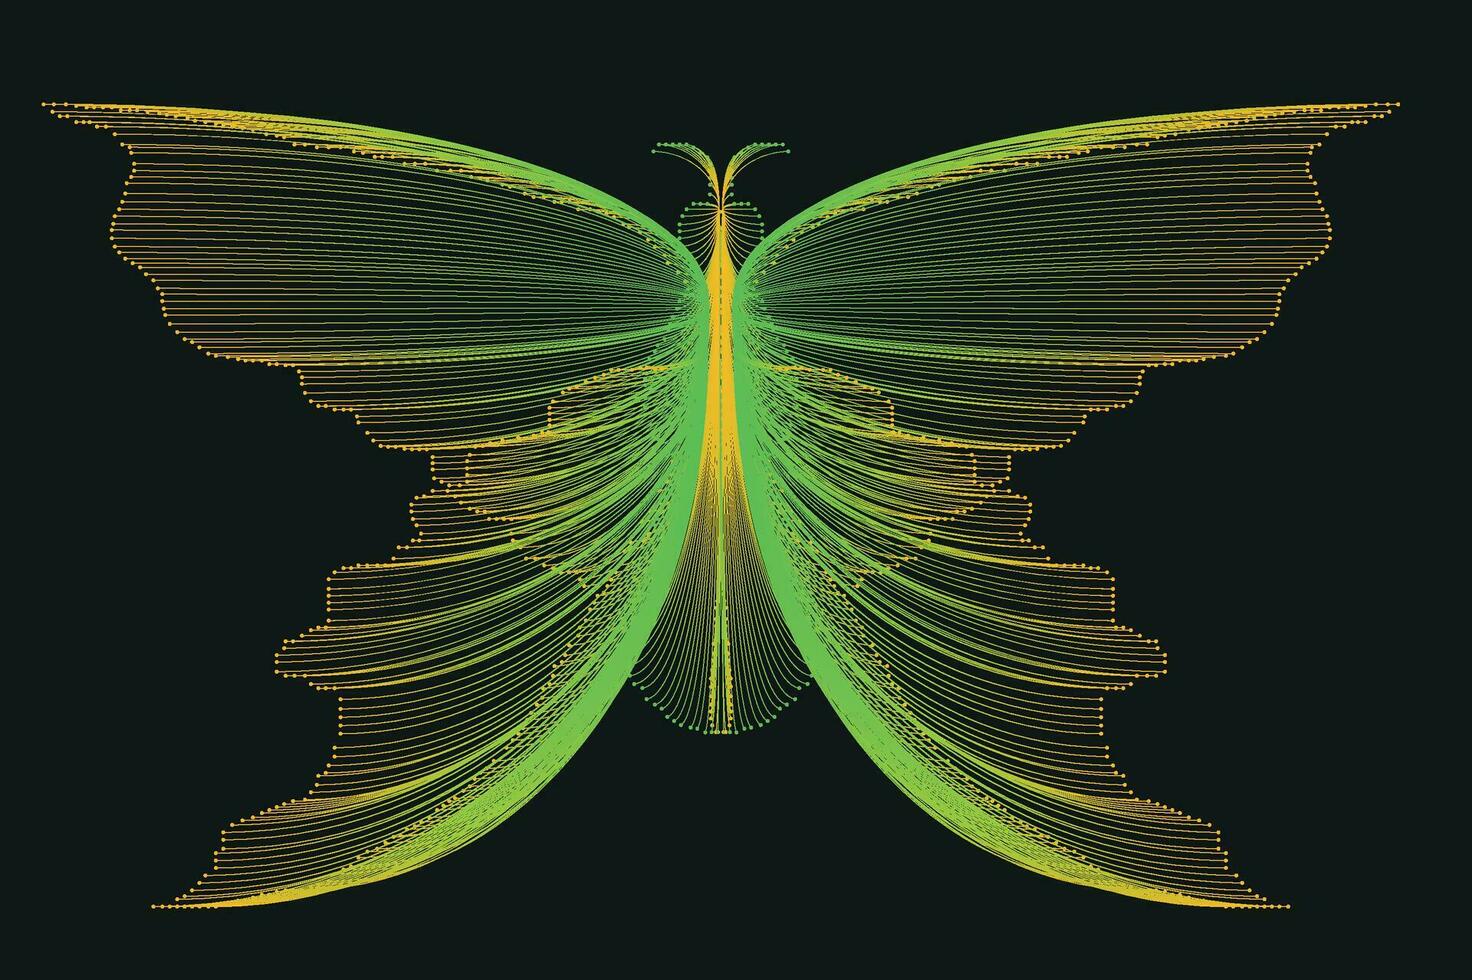 Glowing Neon Line Art Gradient Vector Design In The Shape Of A Butterfly